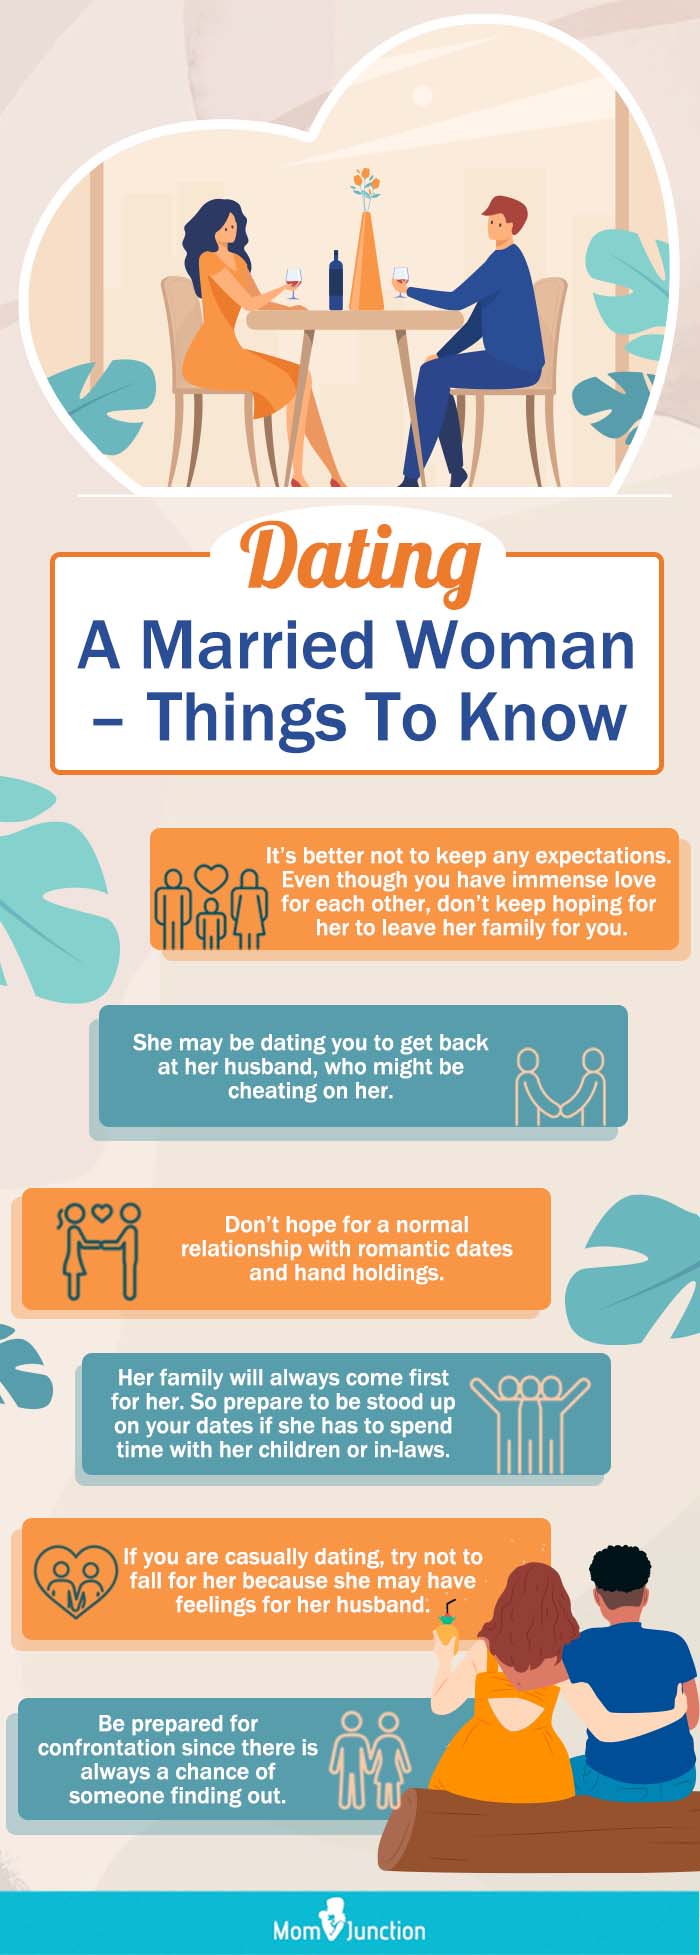 Dating A Married Woman 15 Things You Need To Know image